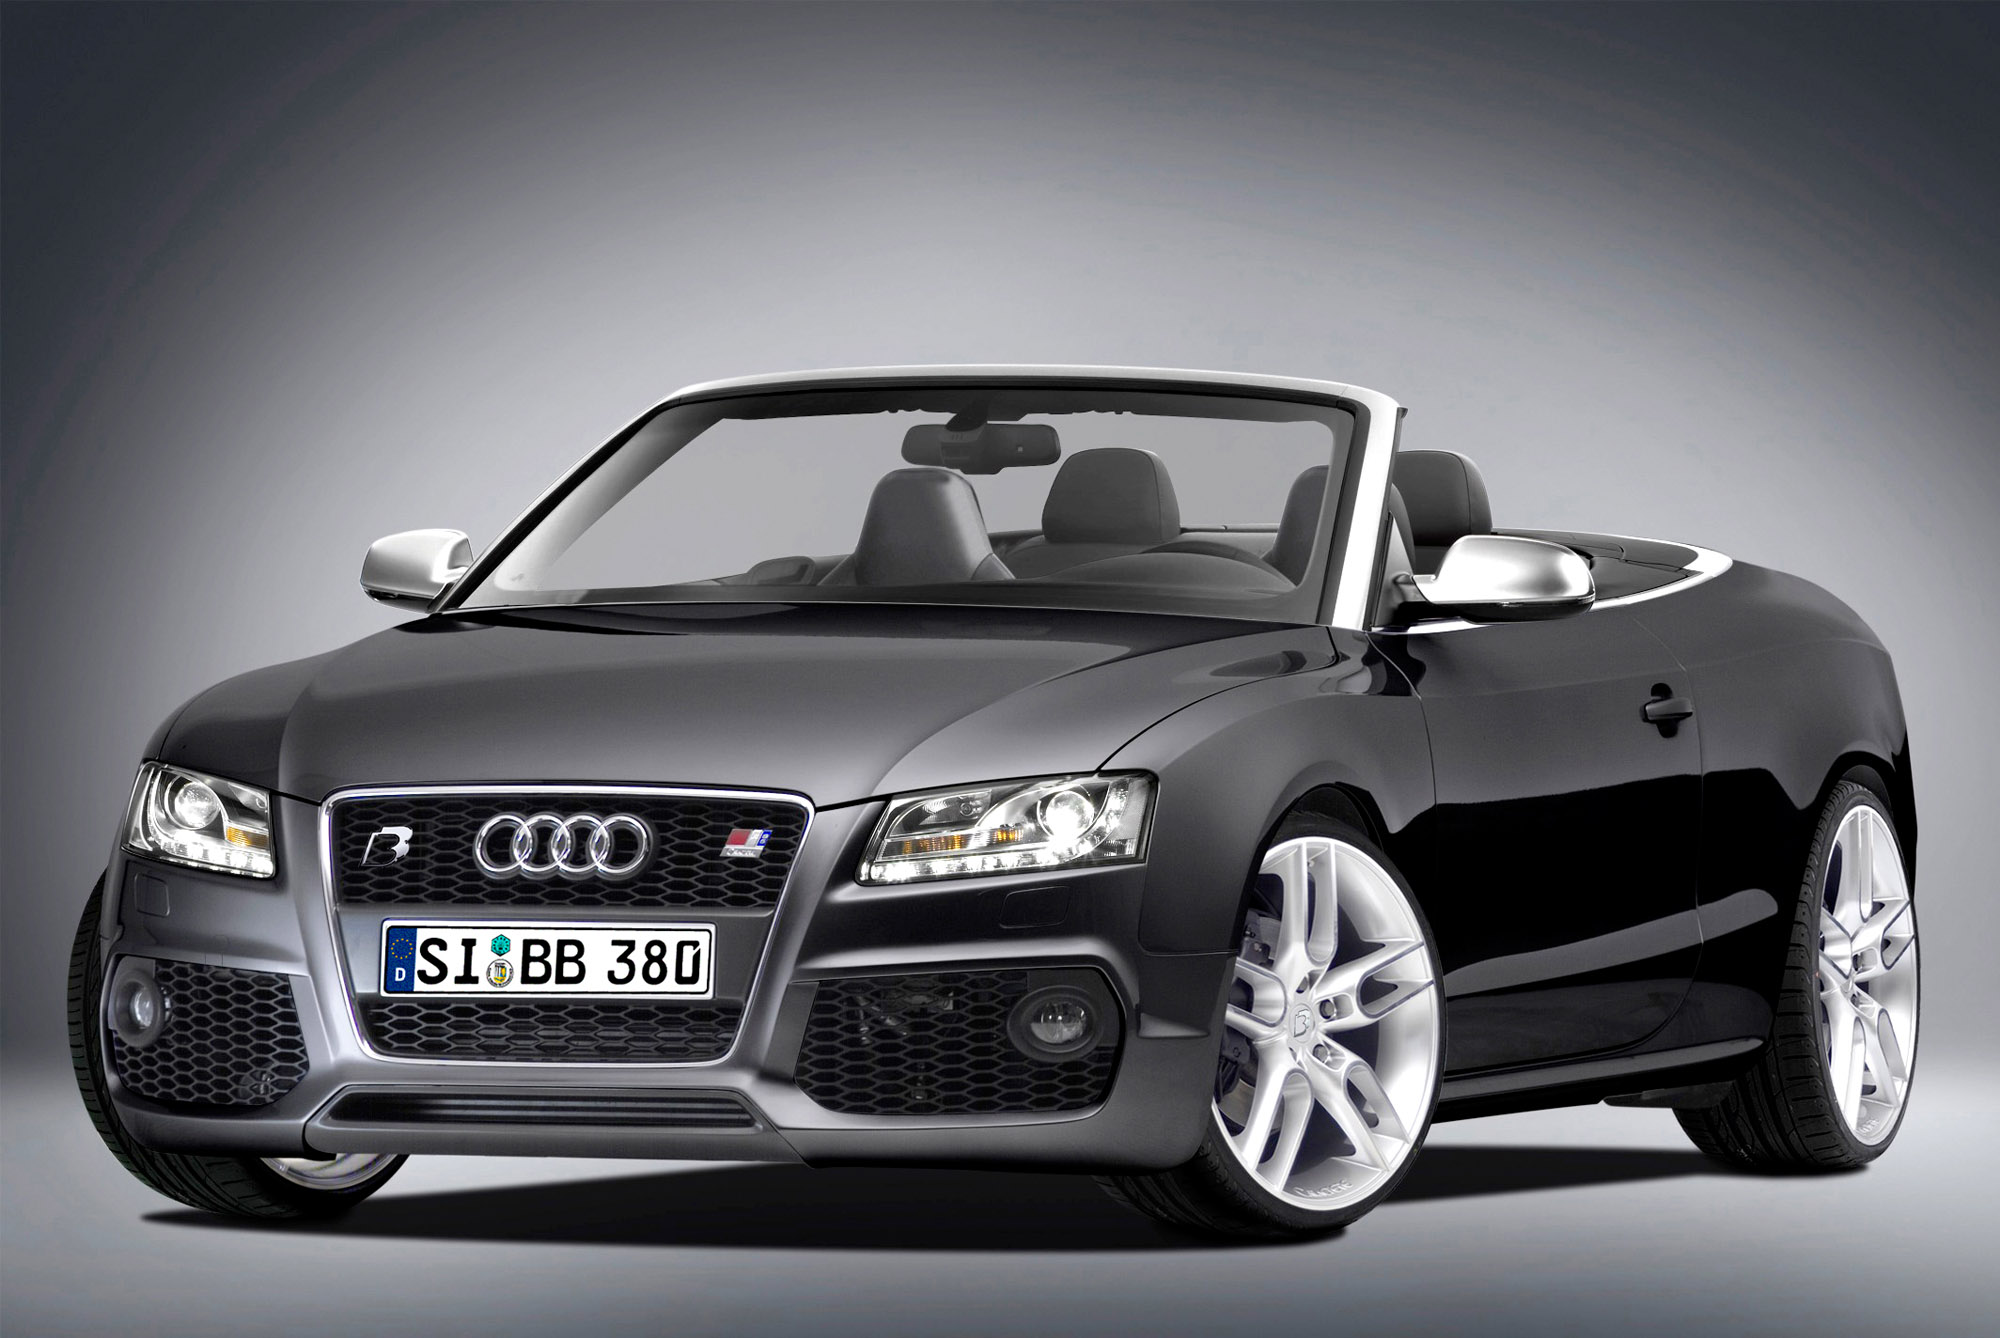 B&B Audi A5 and S5 Cabriolet